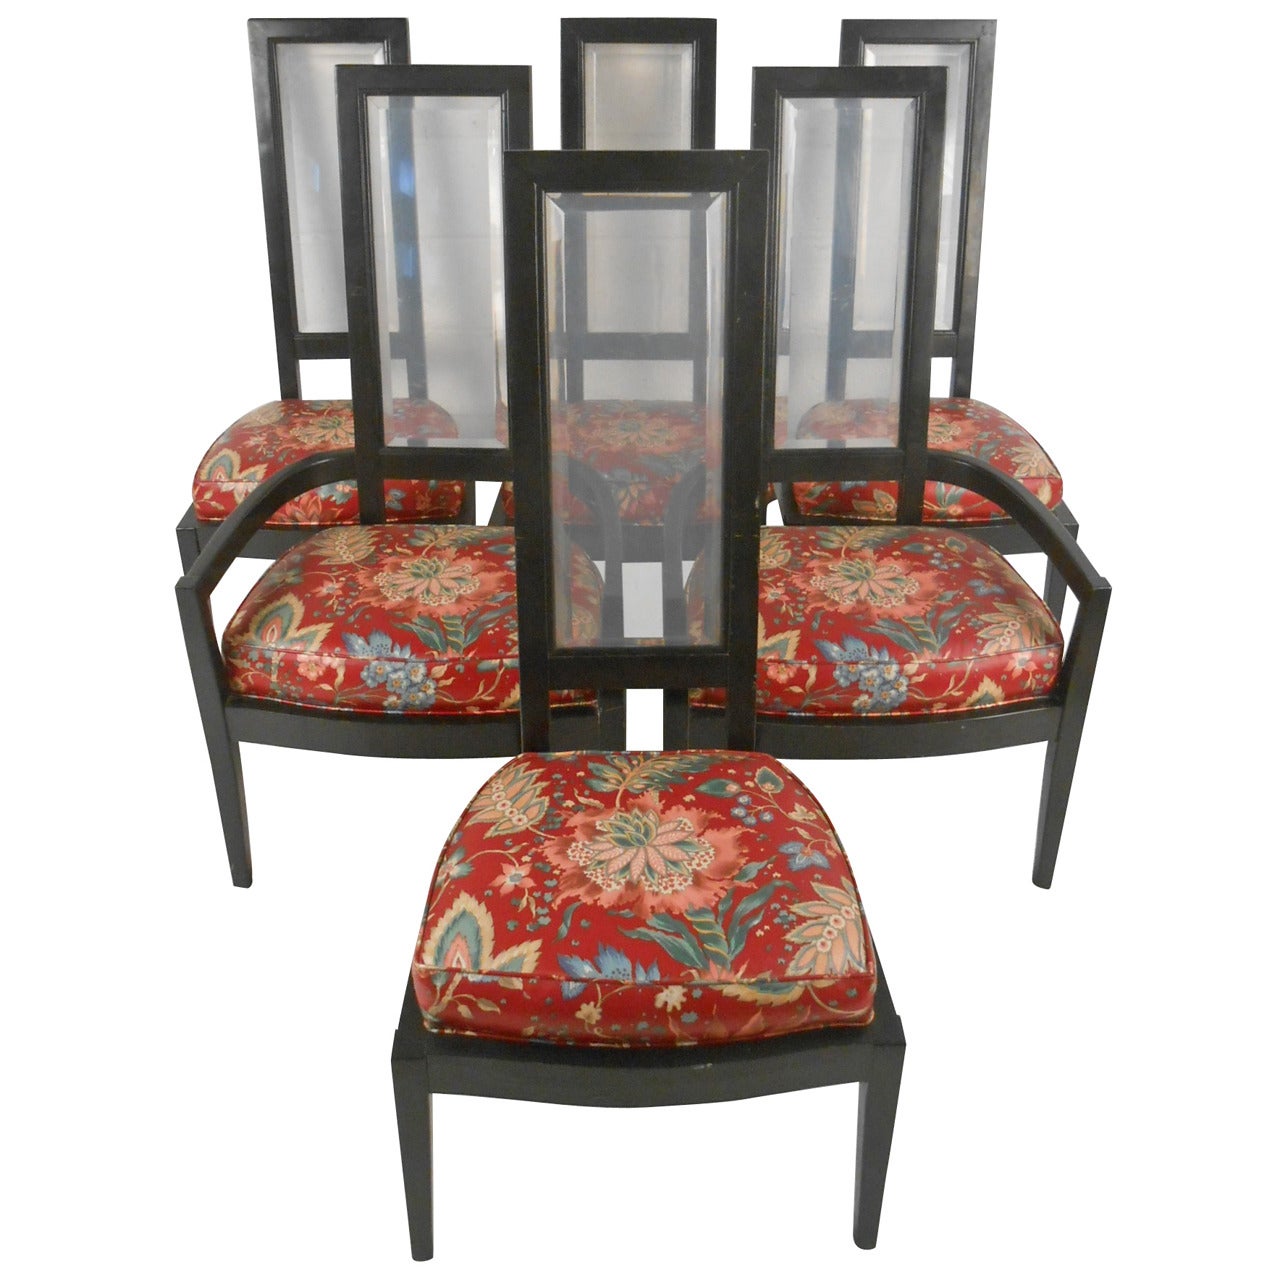 Six Vintage Dining Room Chairs with Lucite Back